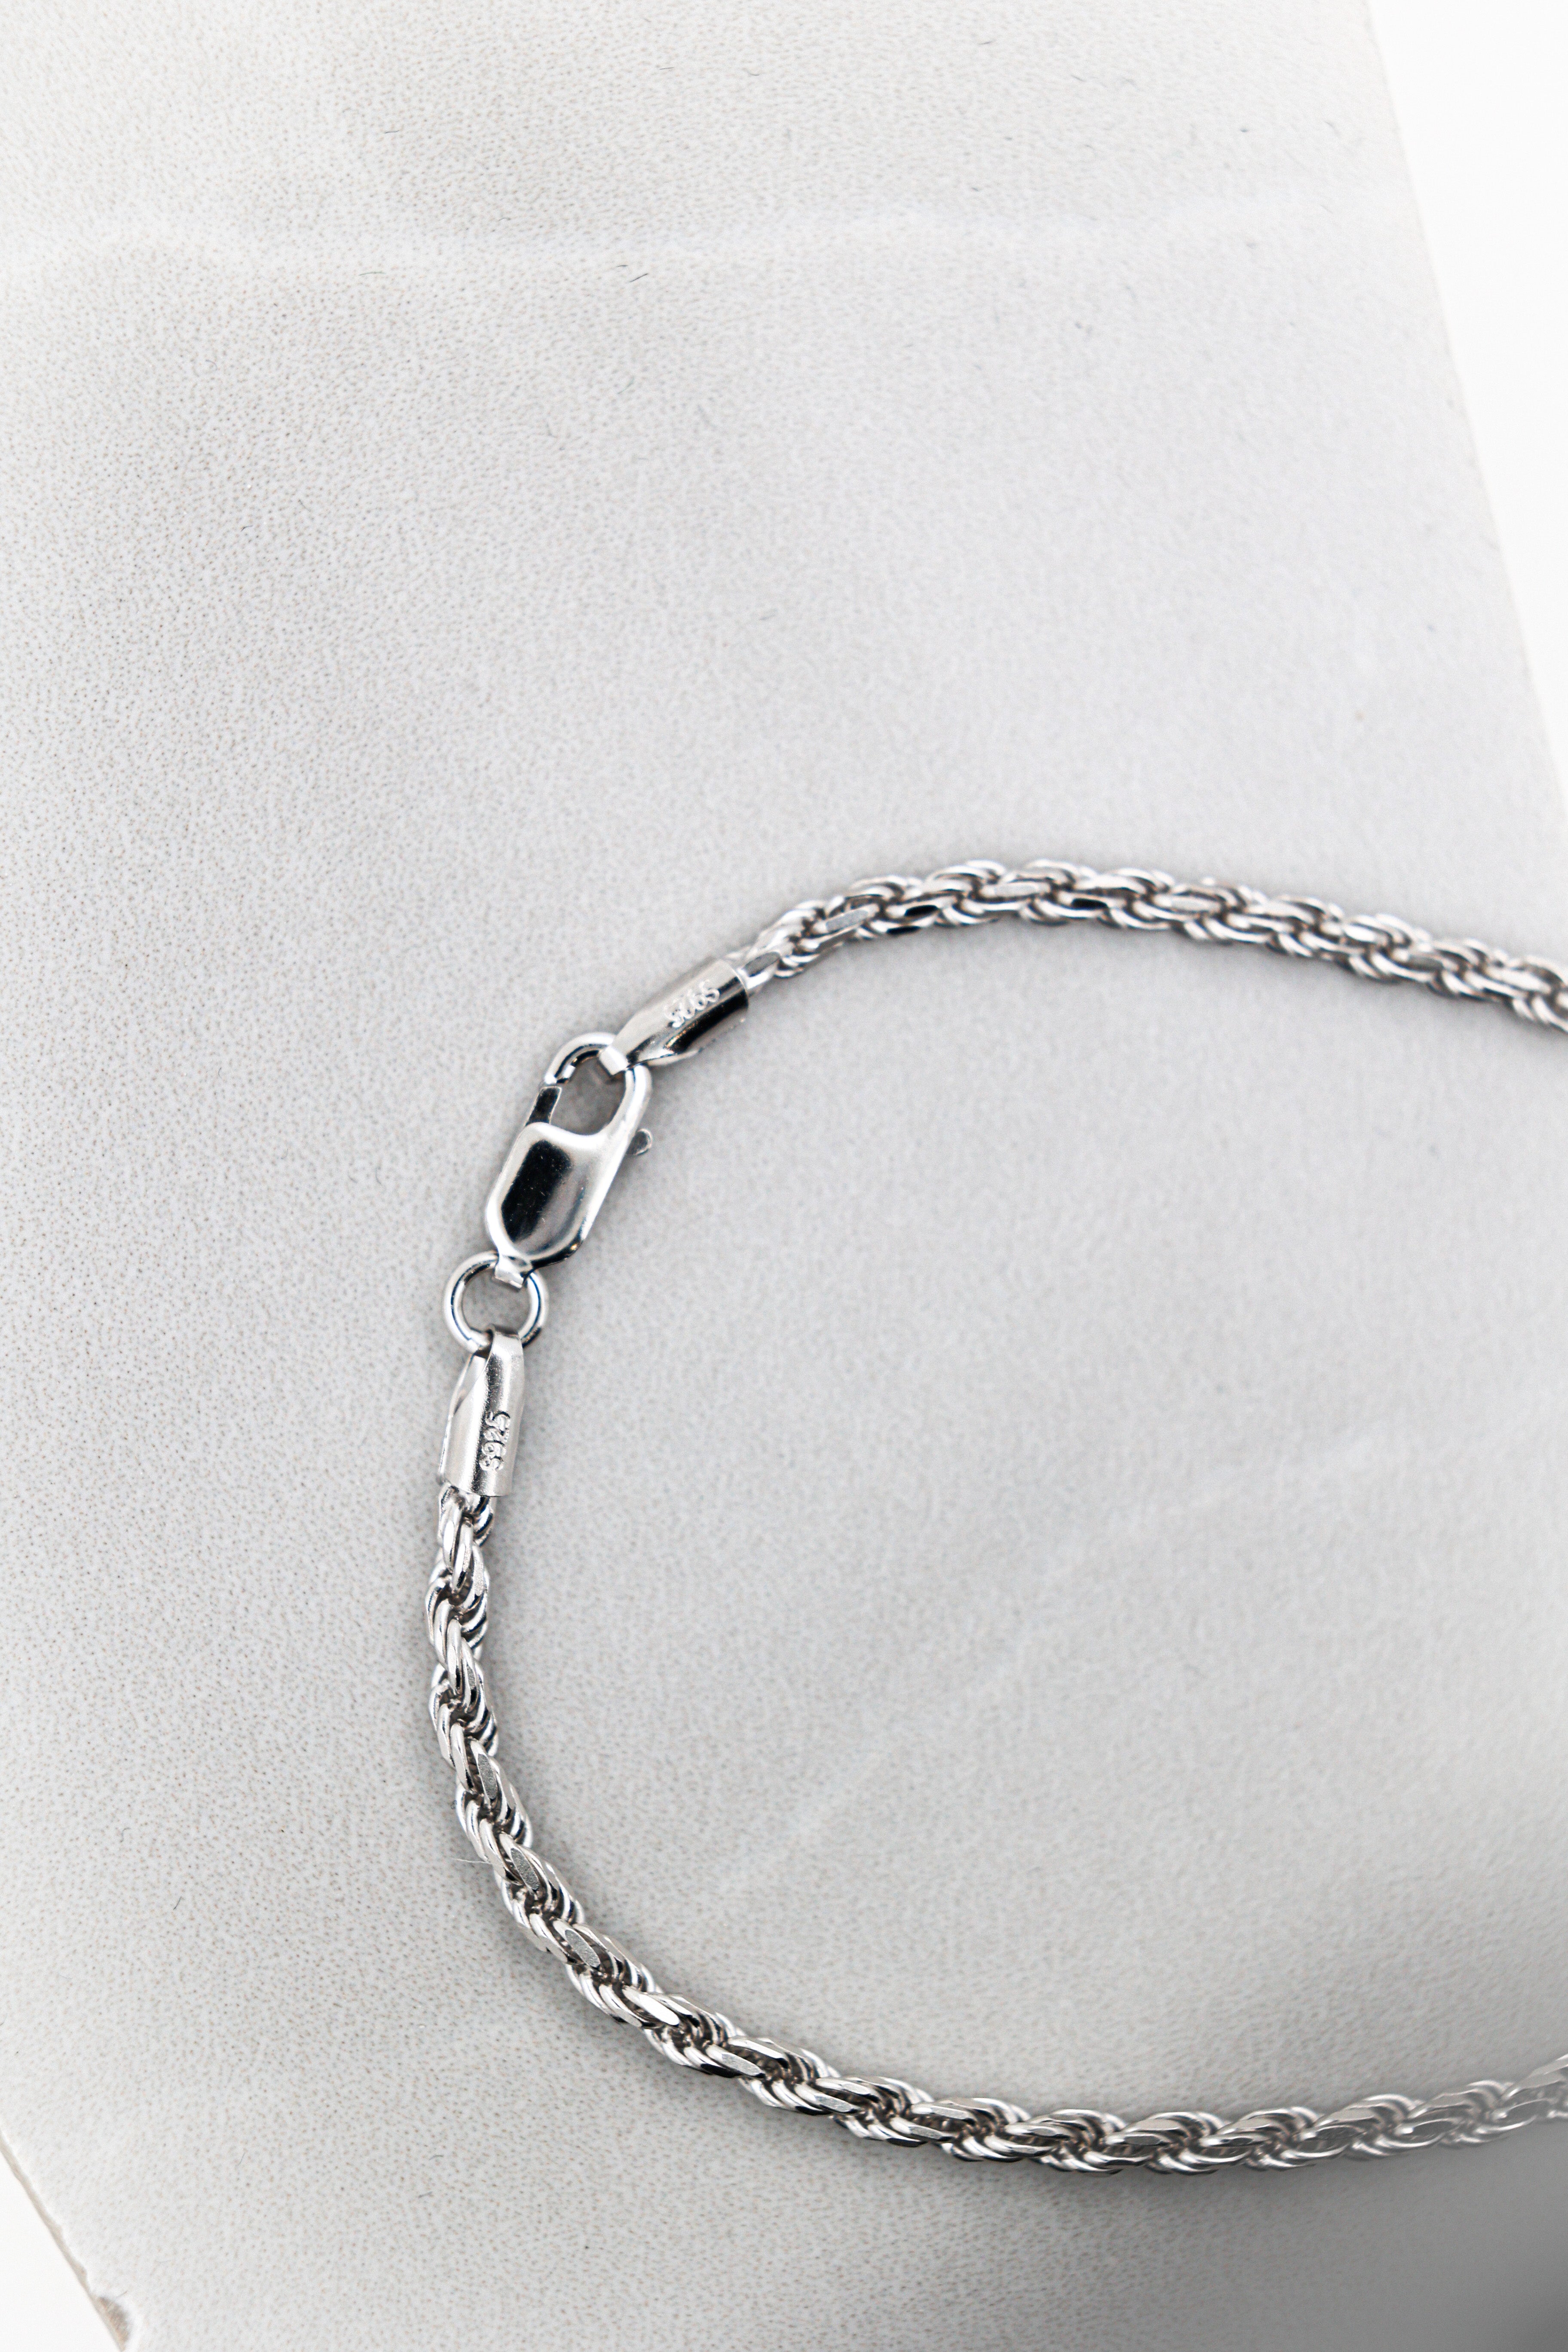 Men's Thick 5mm Rope Bracelet Solid 925 Sterling Silver 8